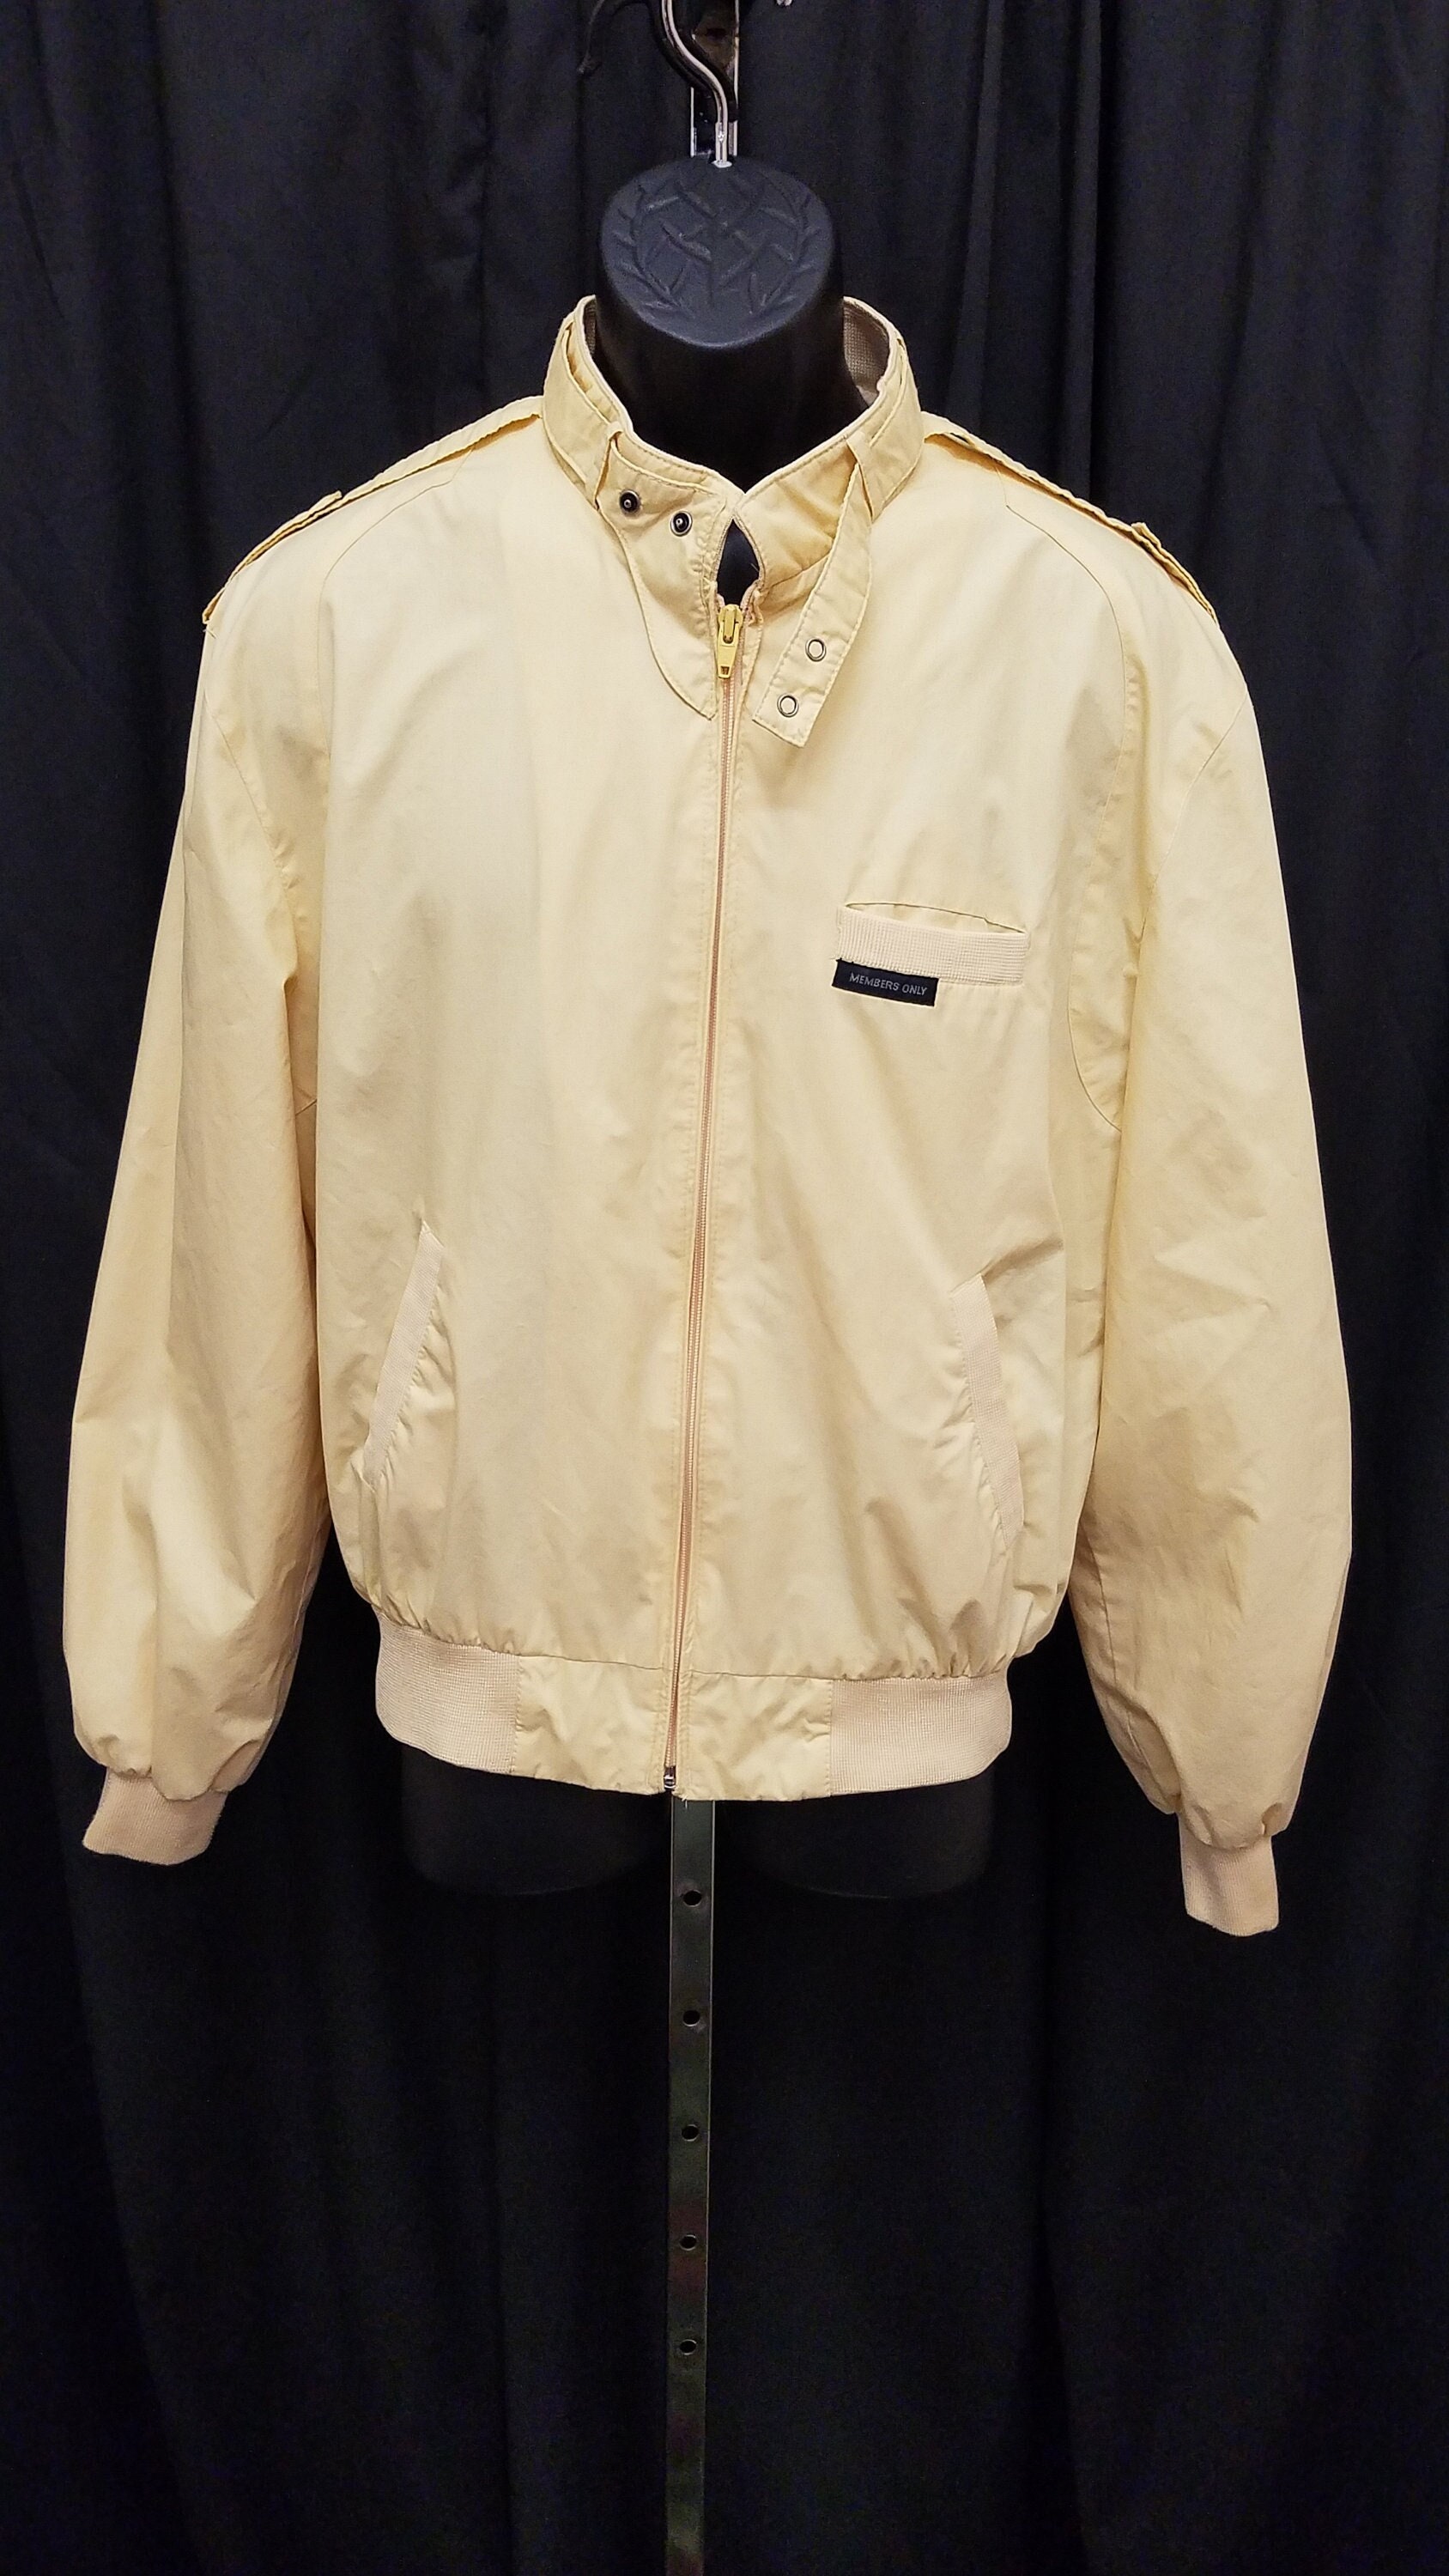 Member's Only Jacket – The Vintage Twin